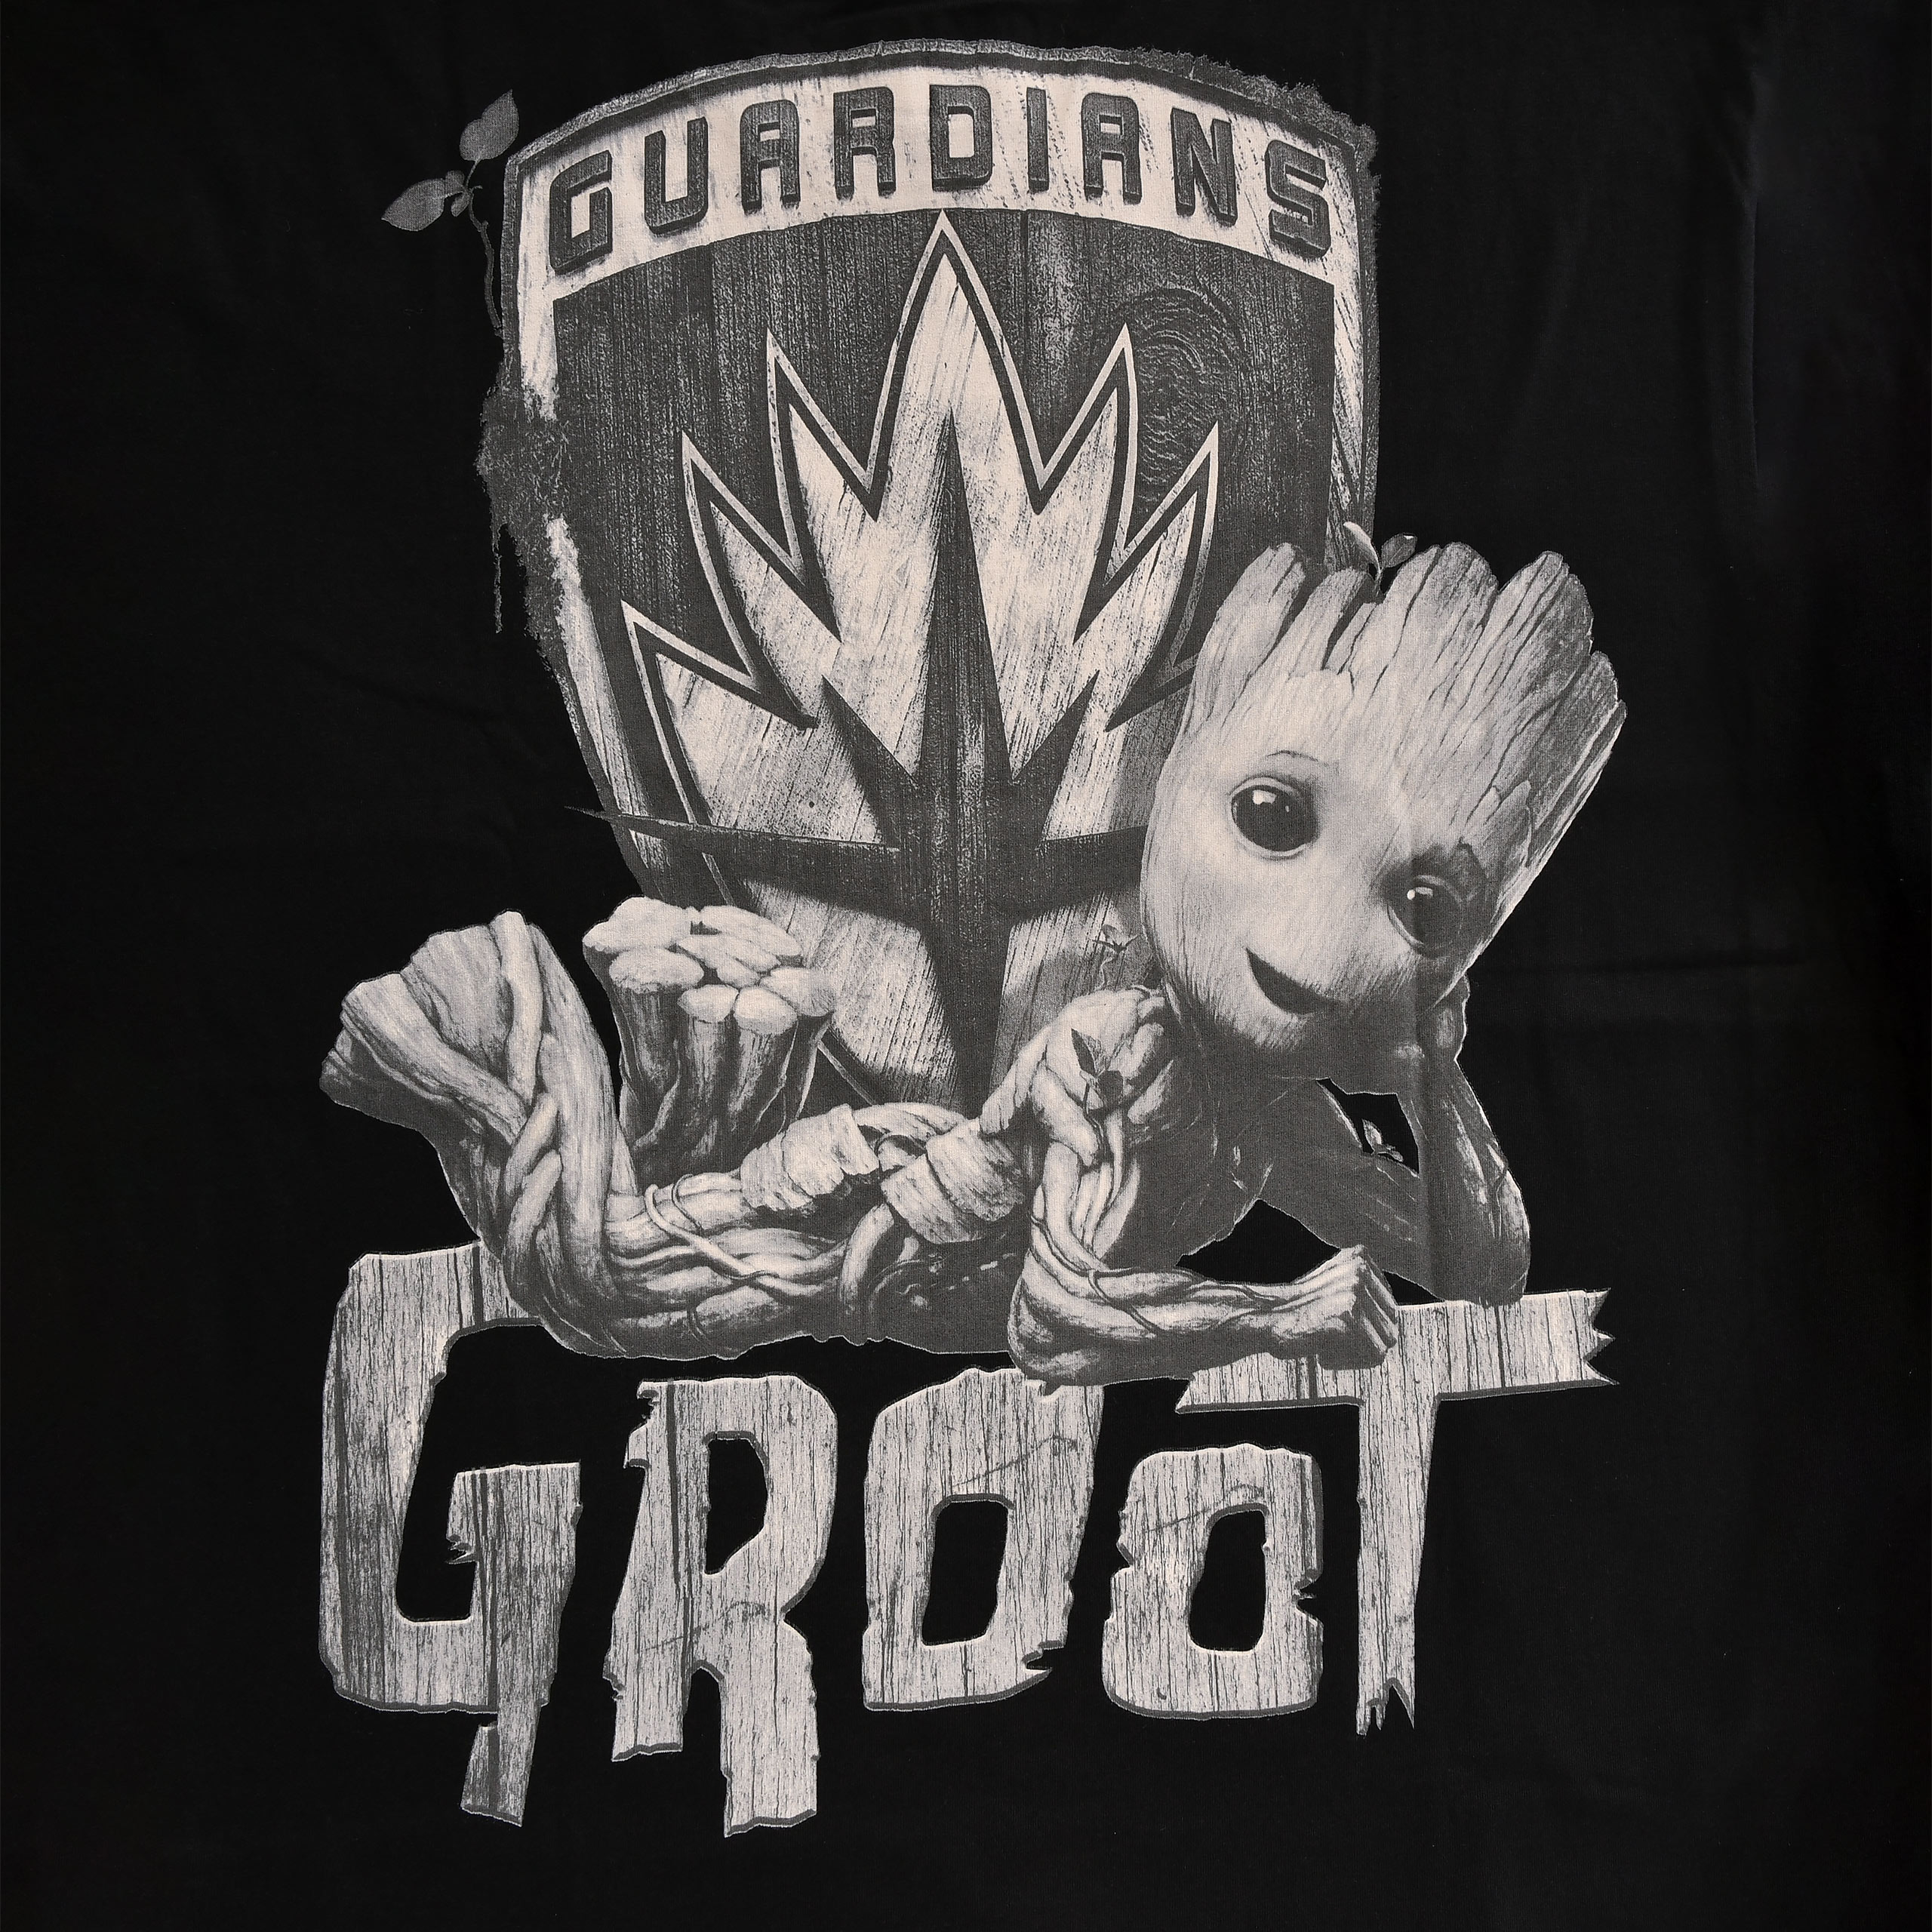 Guardians of the Galaxy - Groot Oversize T-Shirt black